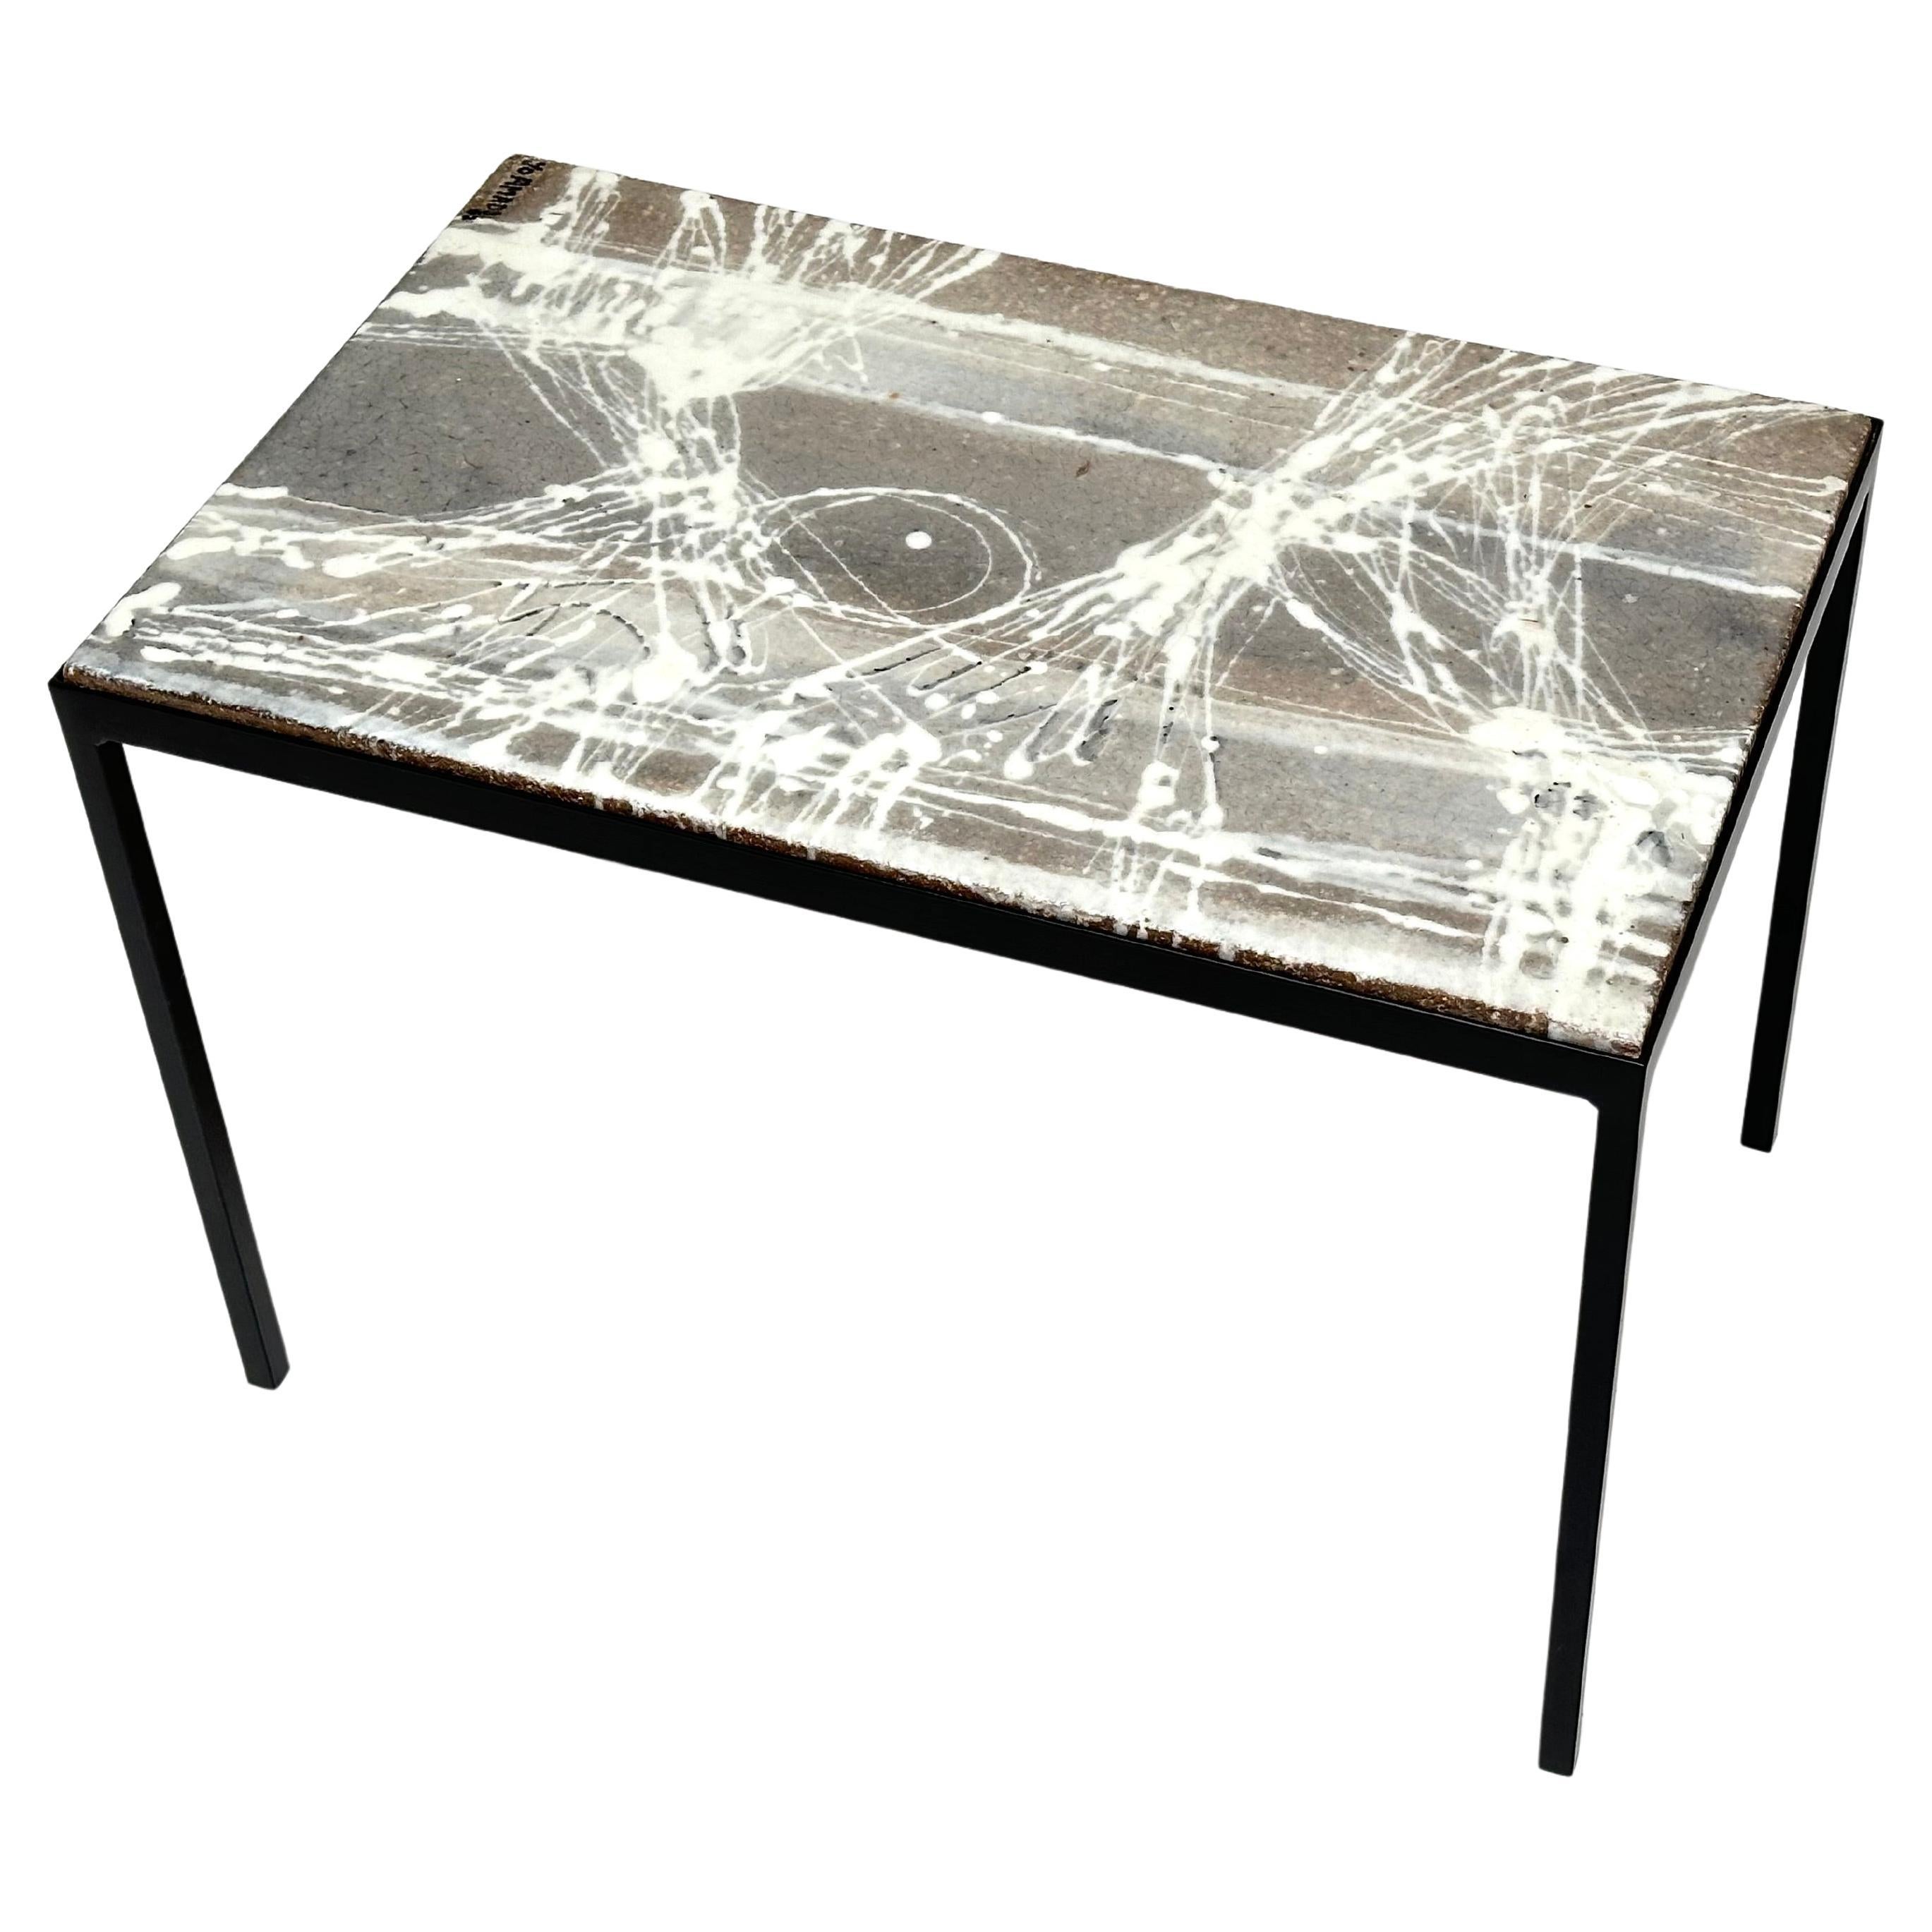 Decorative Low Table, Jo Amado, France 1962 For Sale